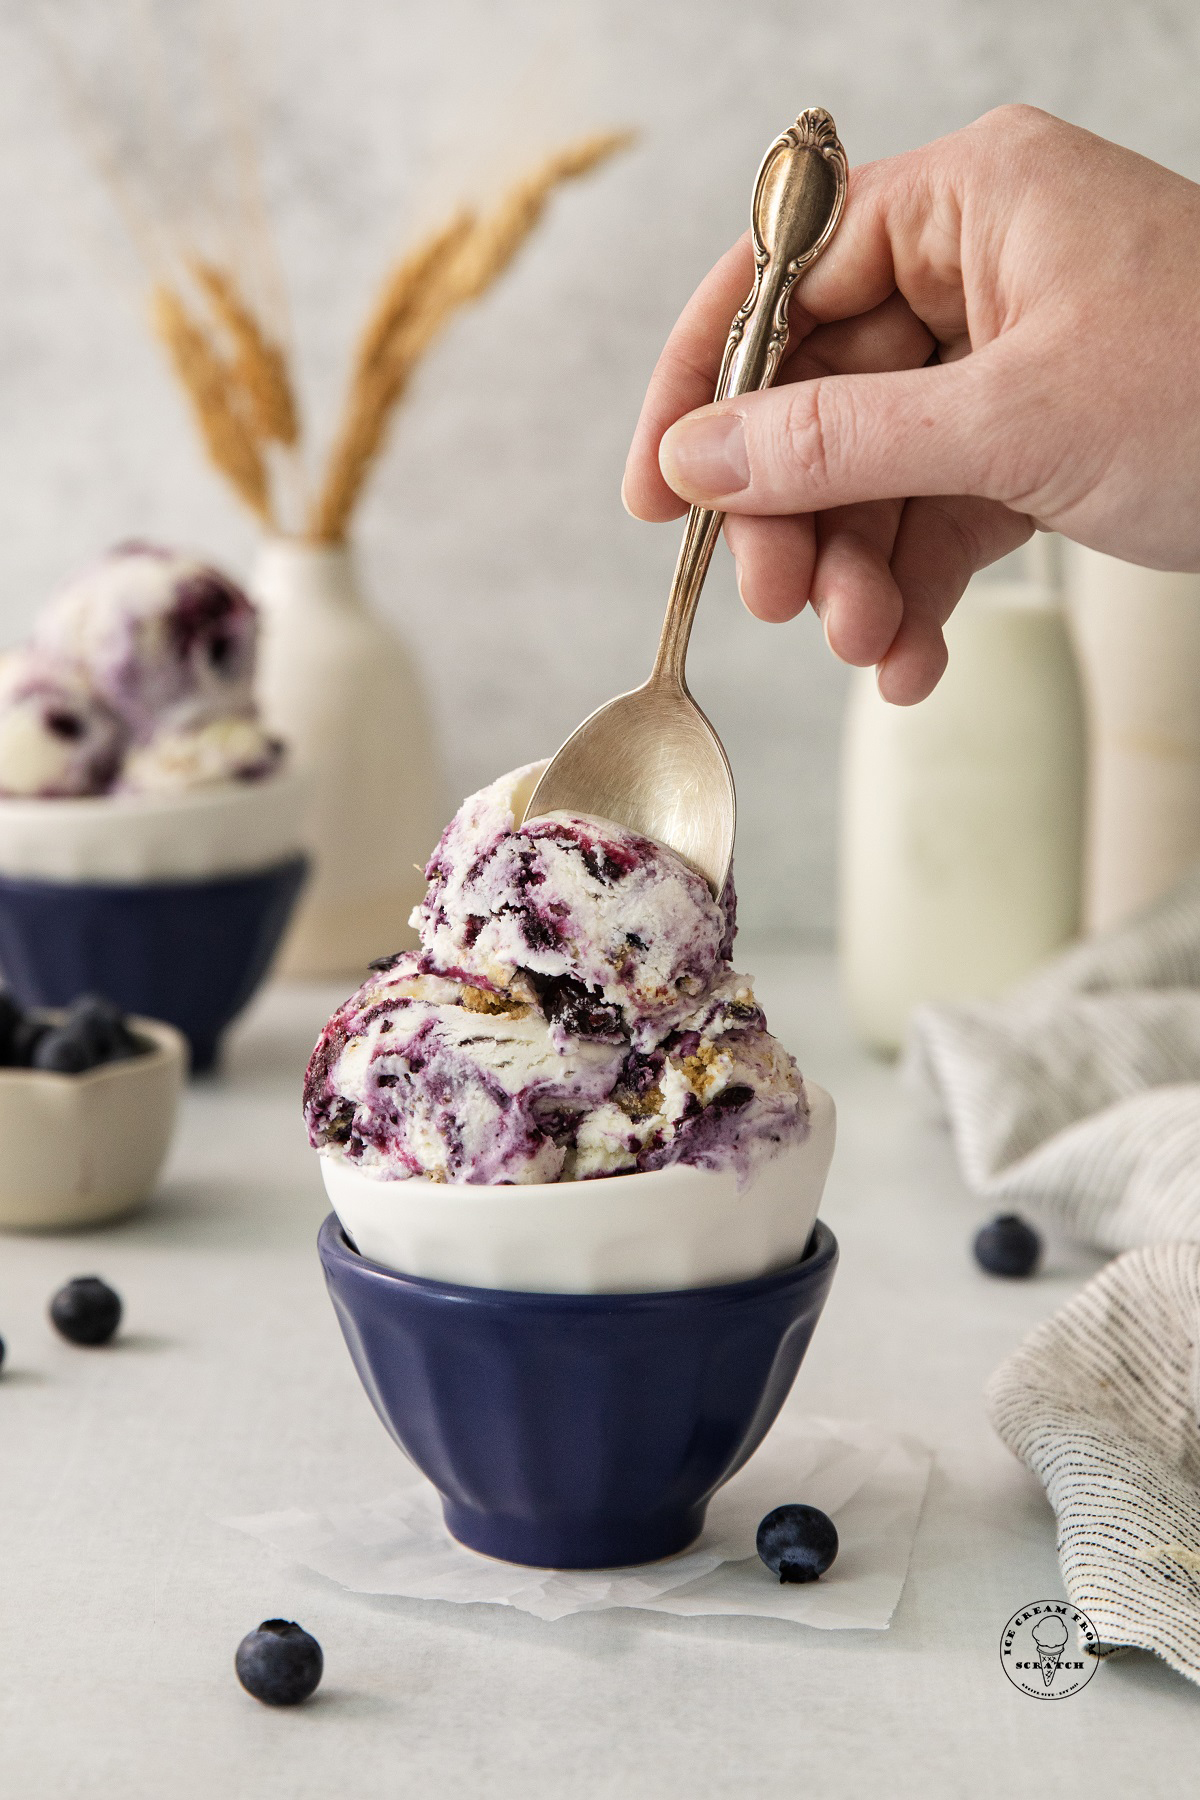 scoops of blueberry cheesecake ice cream in a small bowl, a hand is enjoying it with a spoon